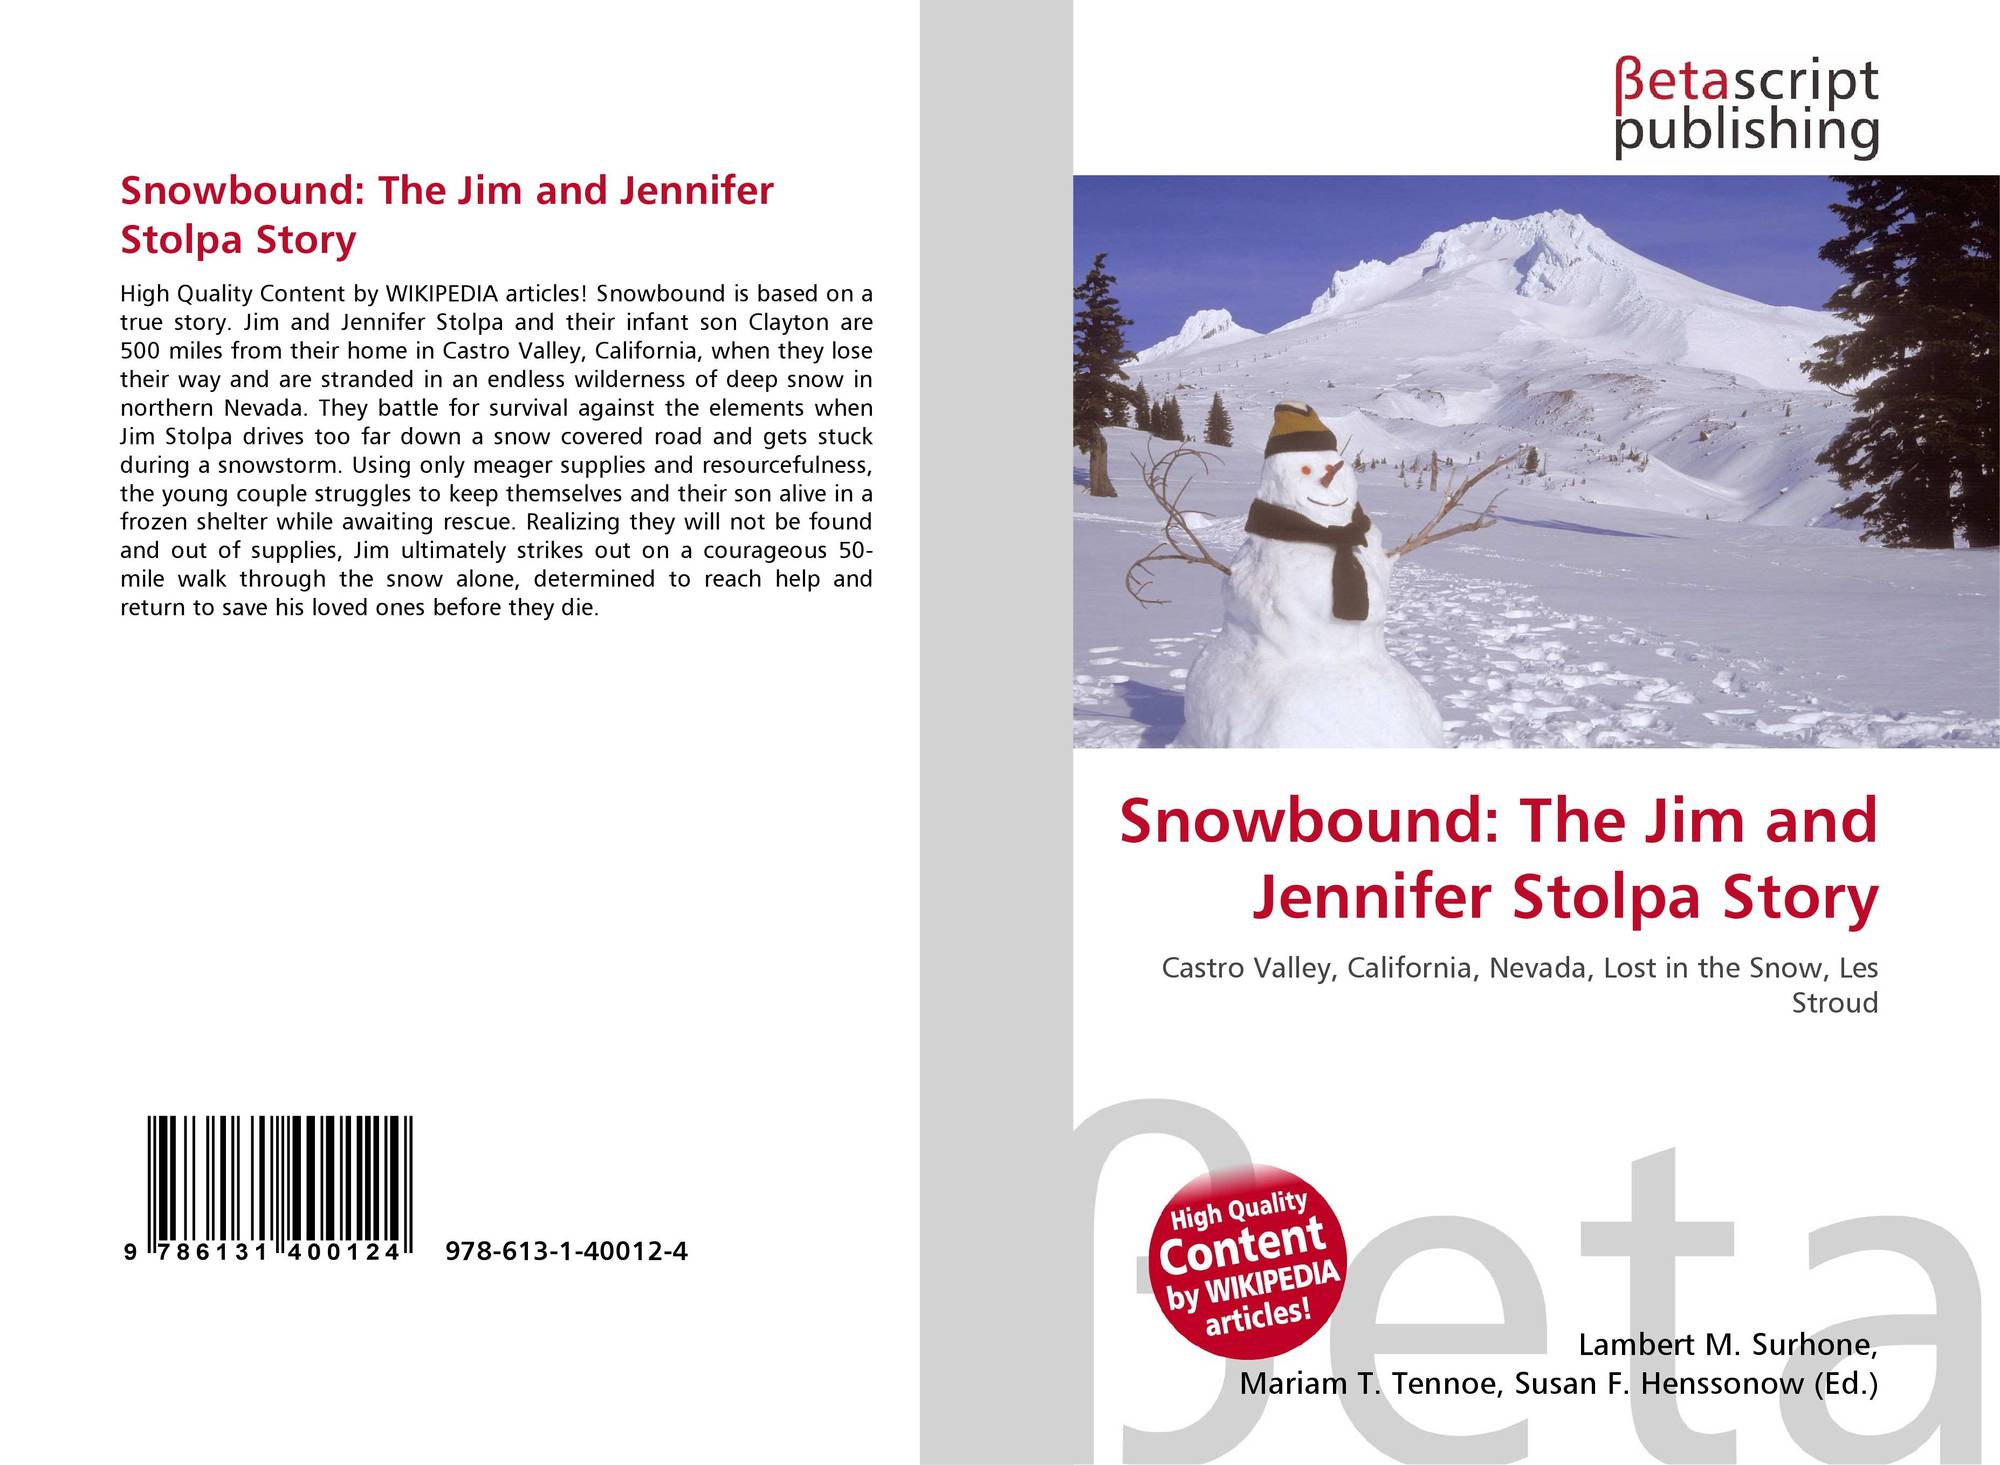 Jennifer pictures and jim stolpa Snowbound: The